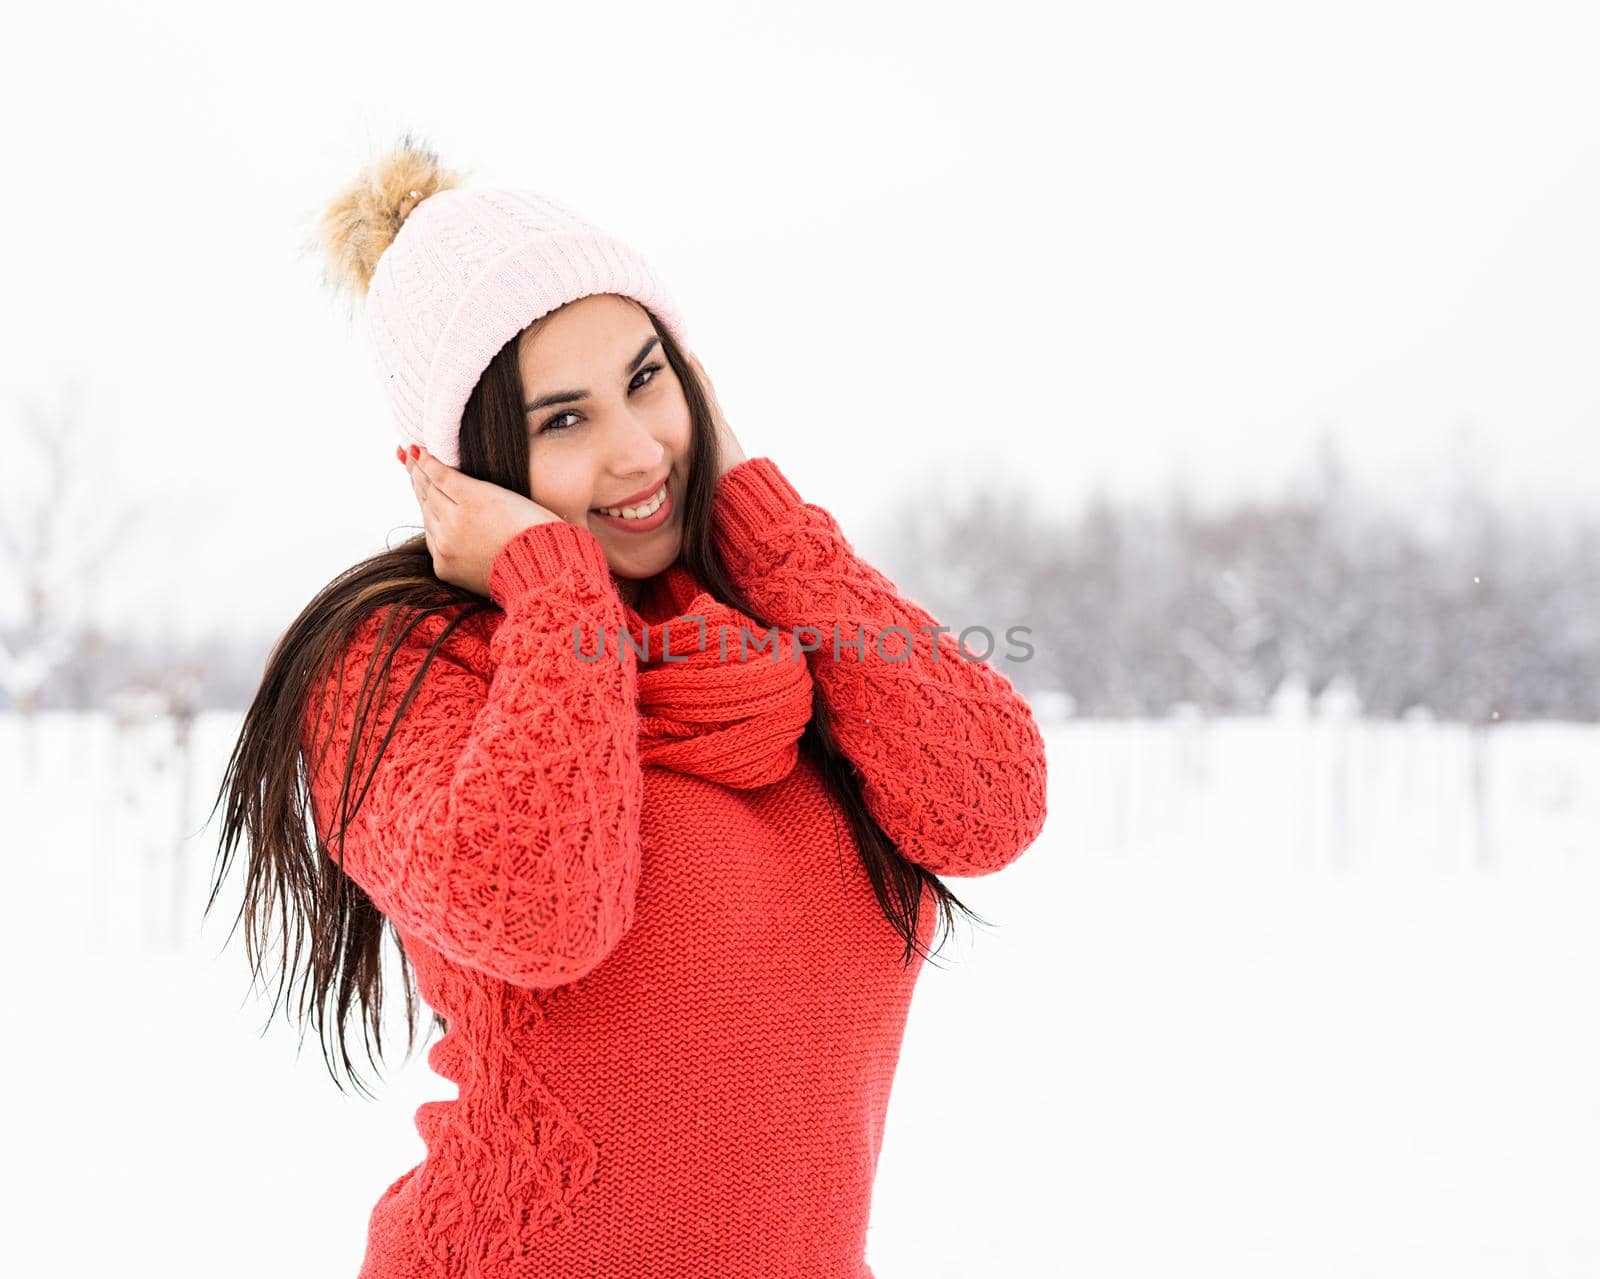 Portrait of a beautiful smiling young woman in wintertime outdoors by Desperada